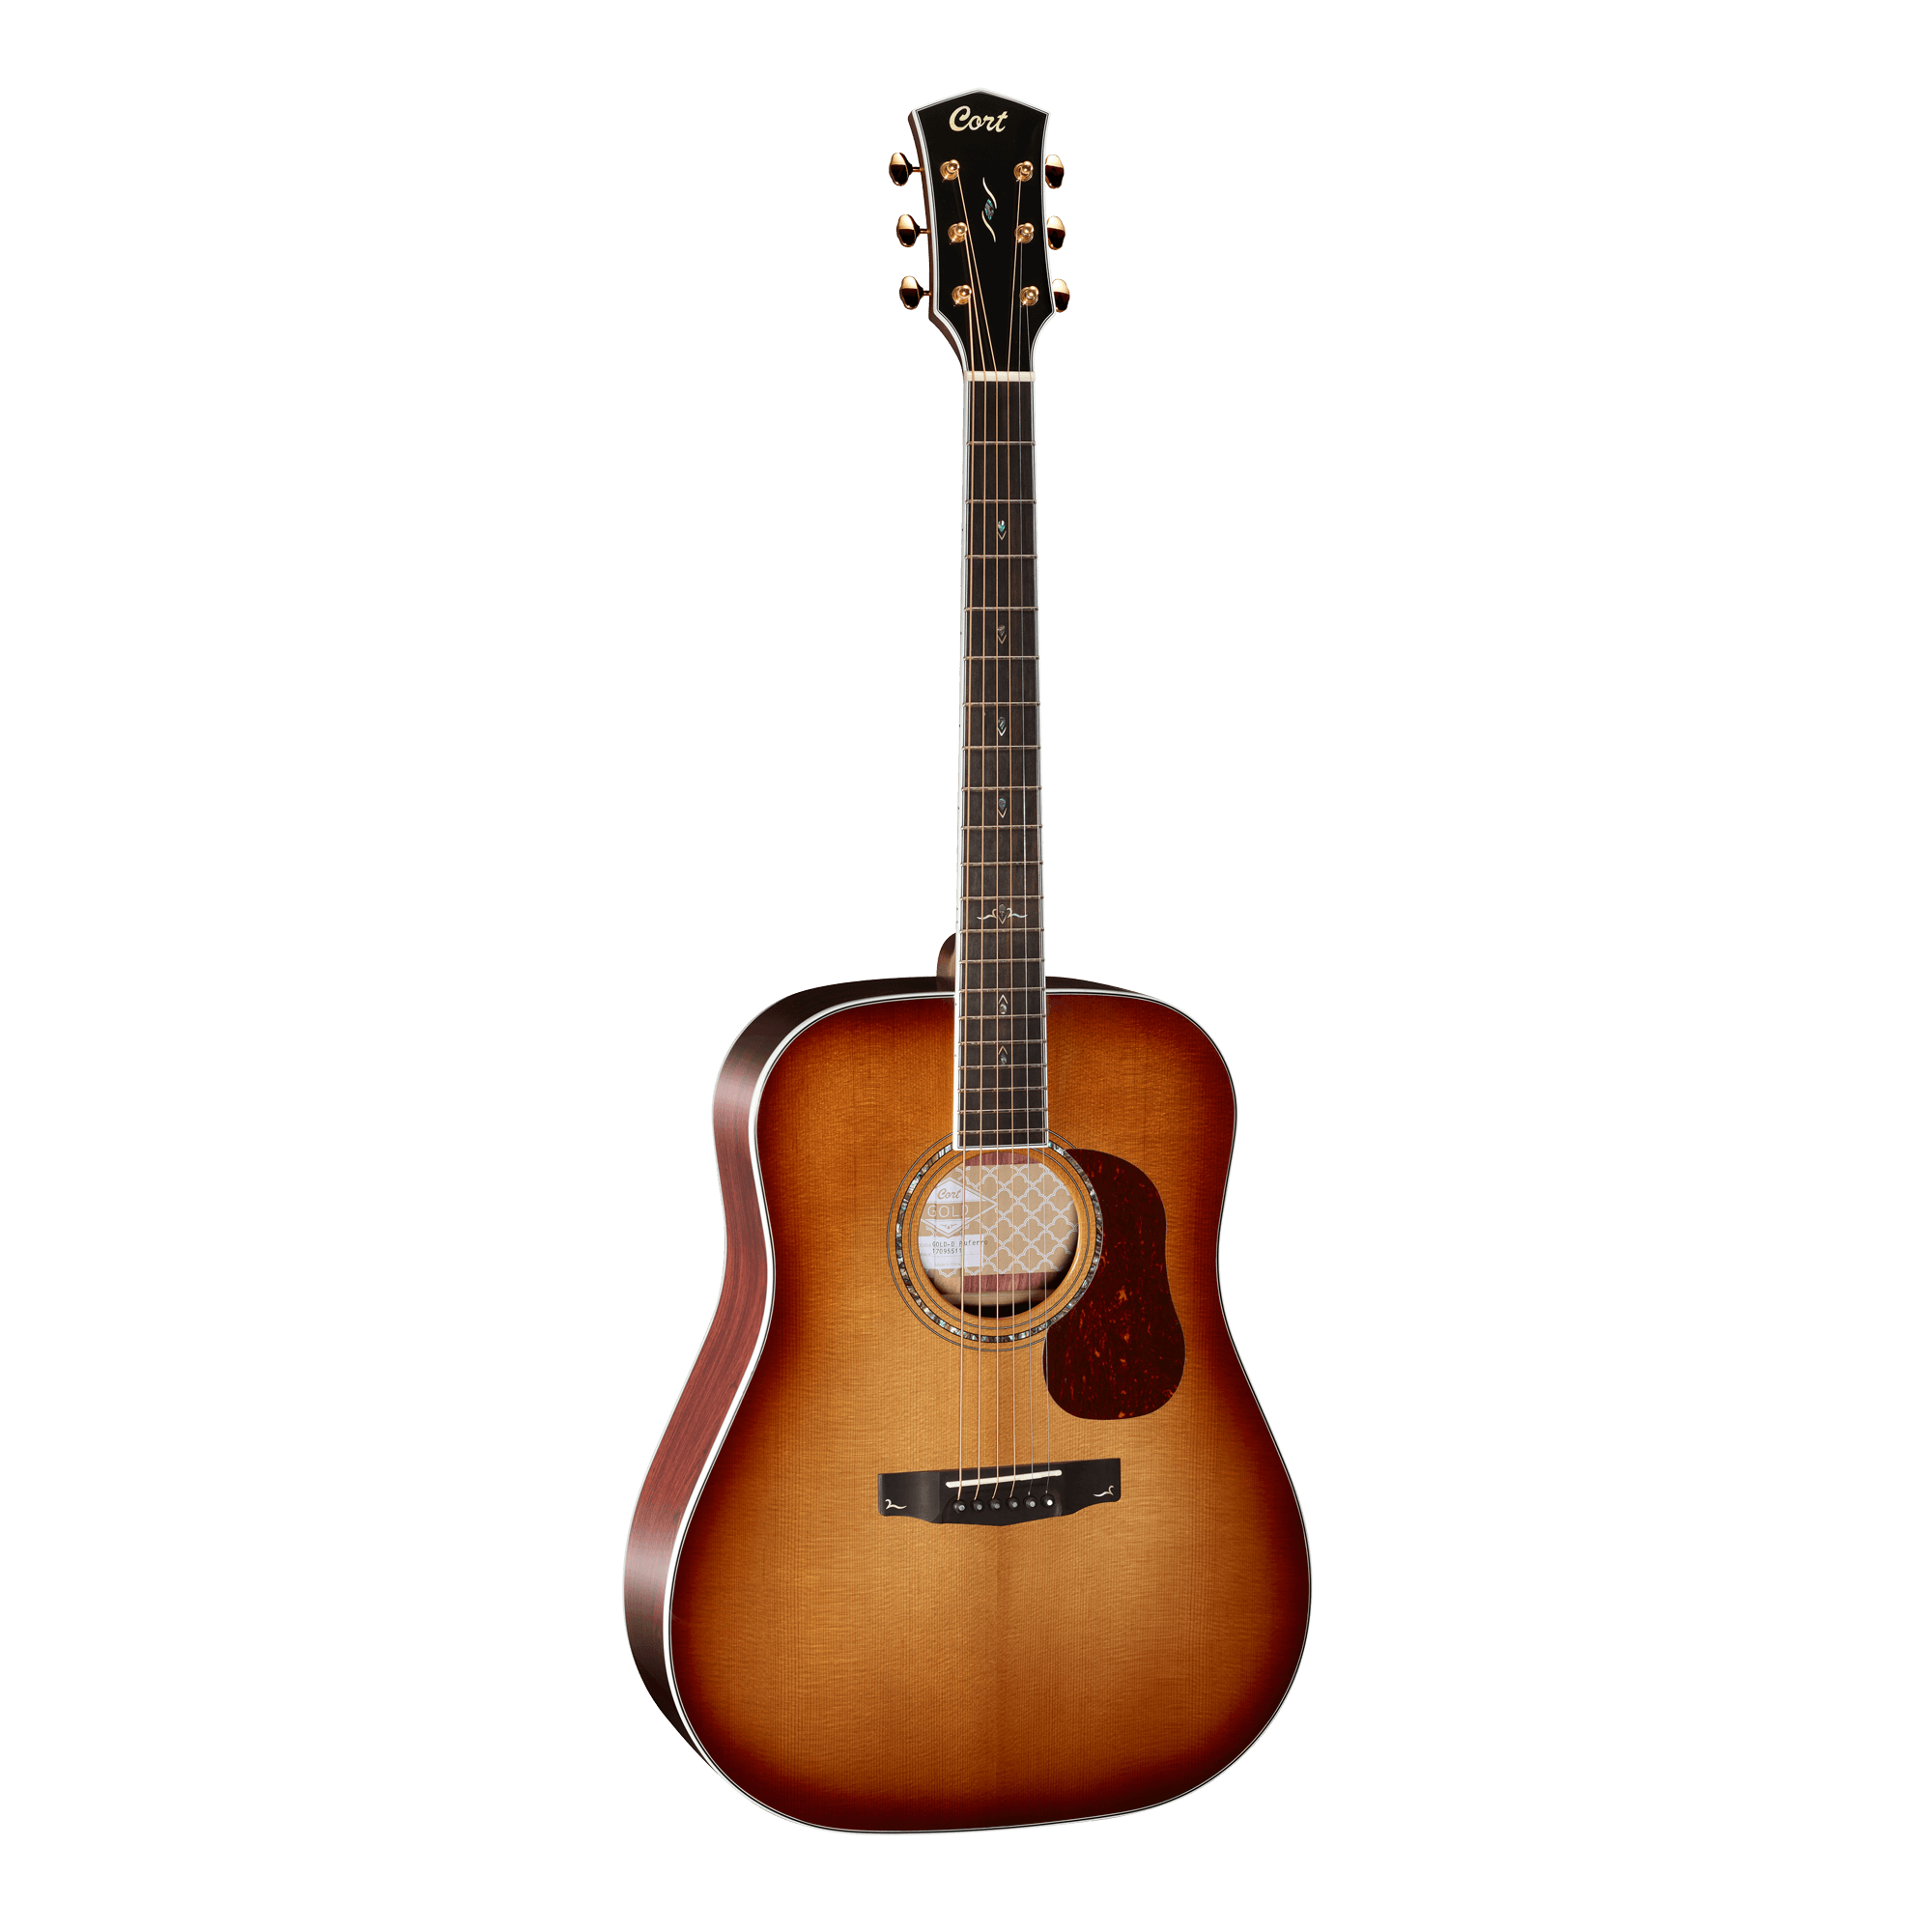 Gold D8 LB Dreadnought Guitar Gloss With Soft Case - Guitars - Acoustic by Cort at Muso's Stuff